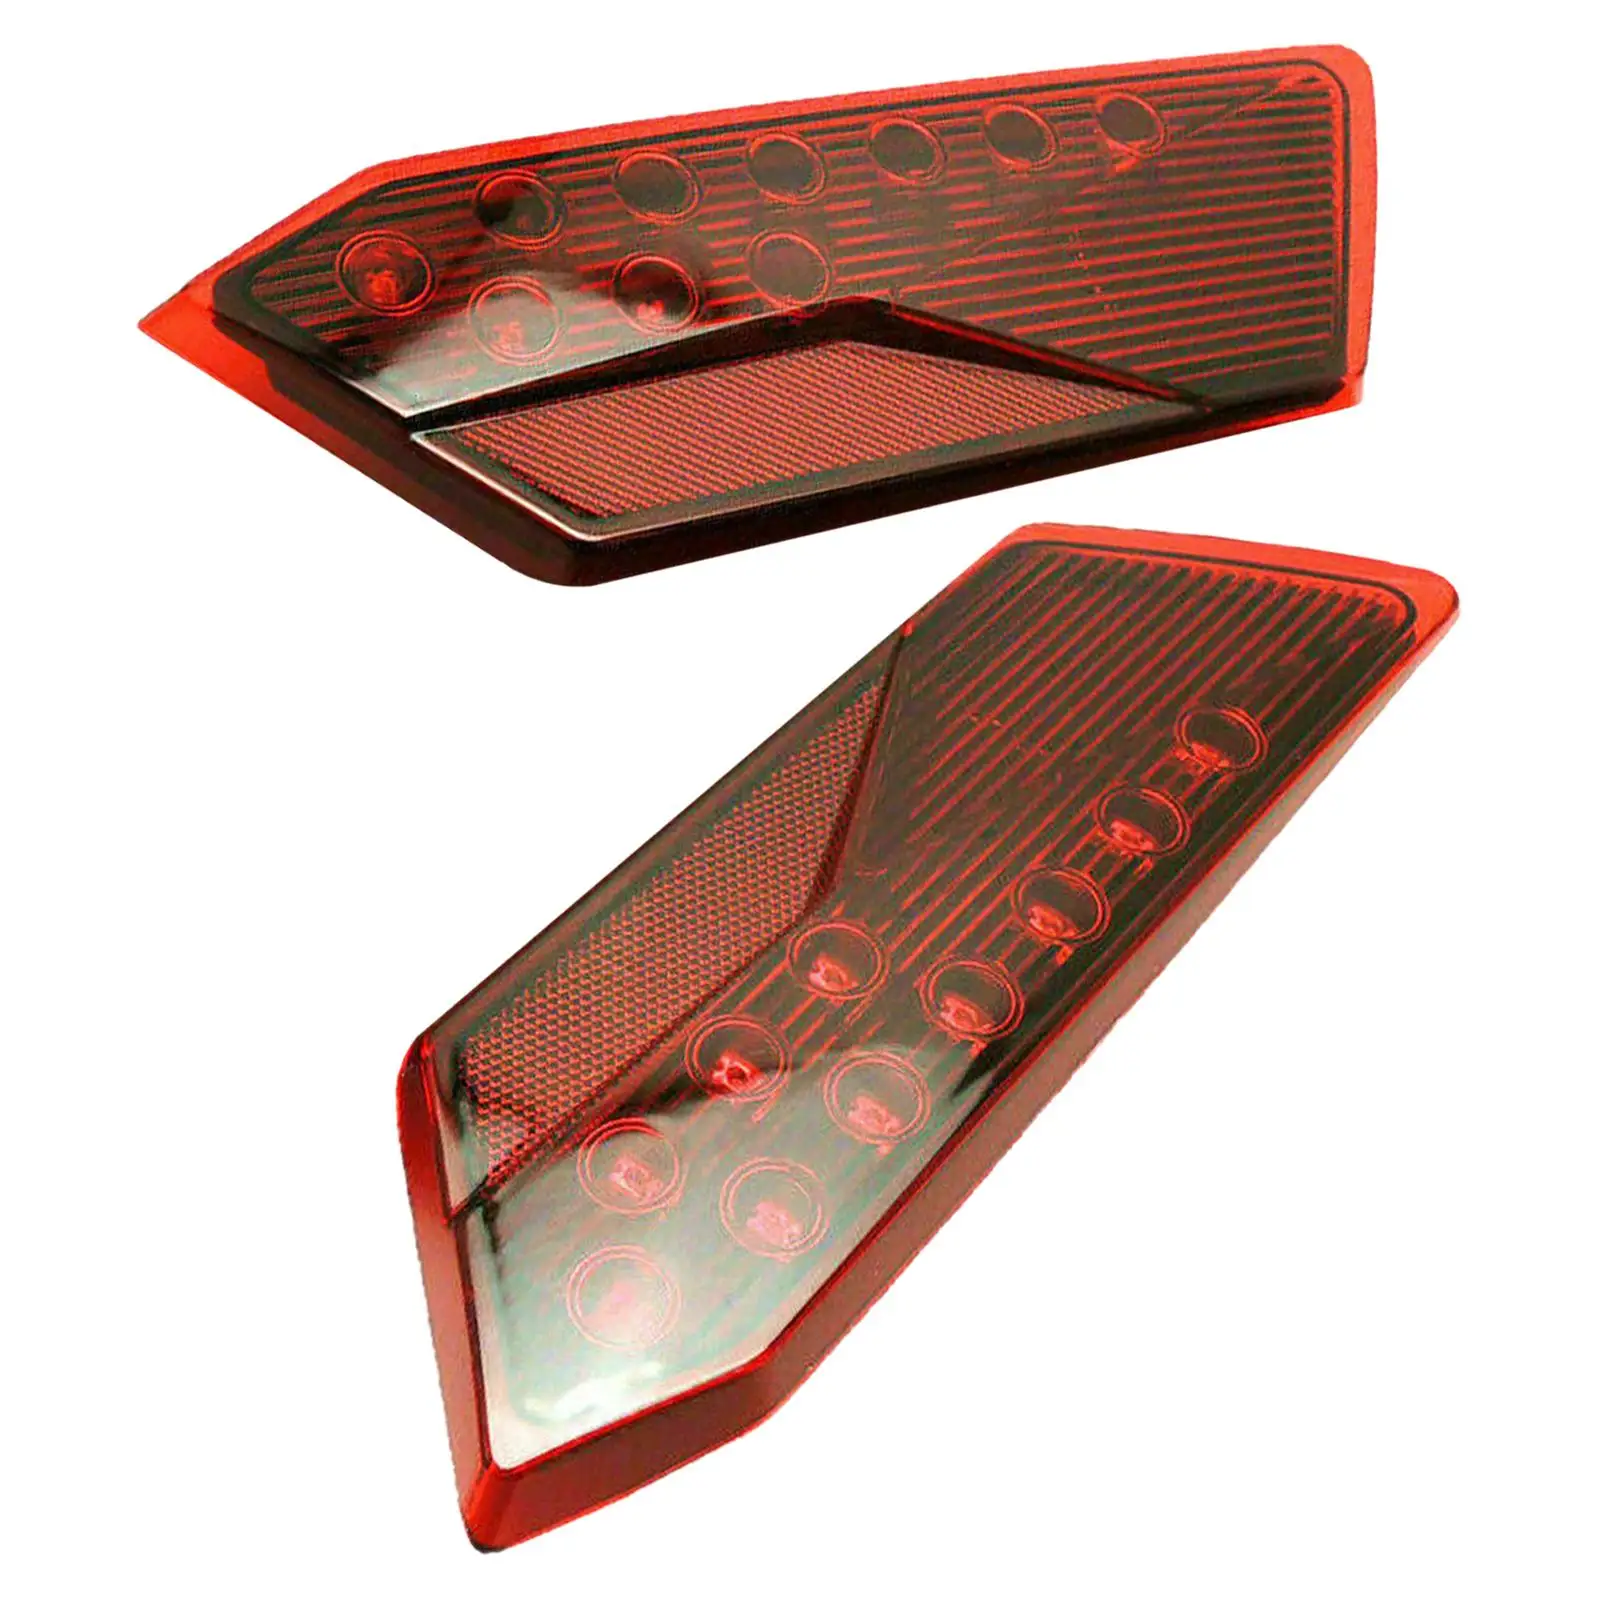 2x Tail Lights Accessories Fit for RZR 2014-2019 2412341 2412342